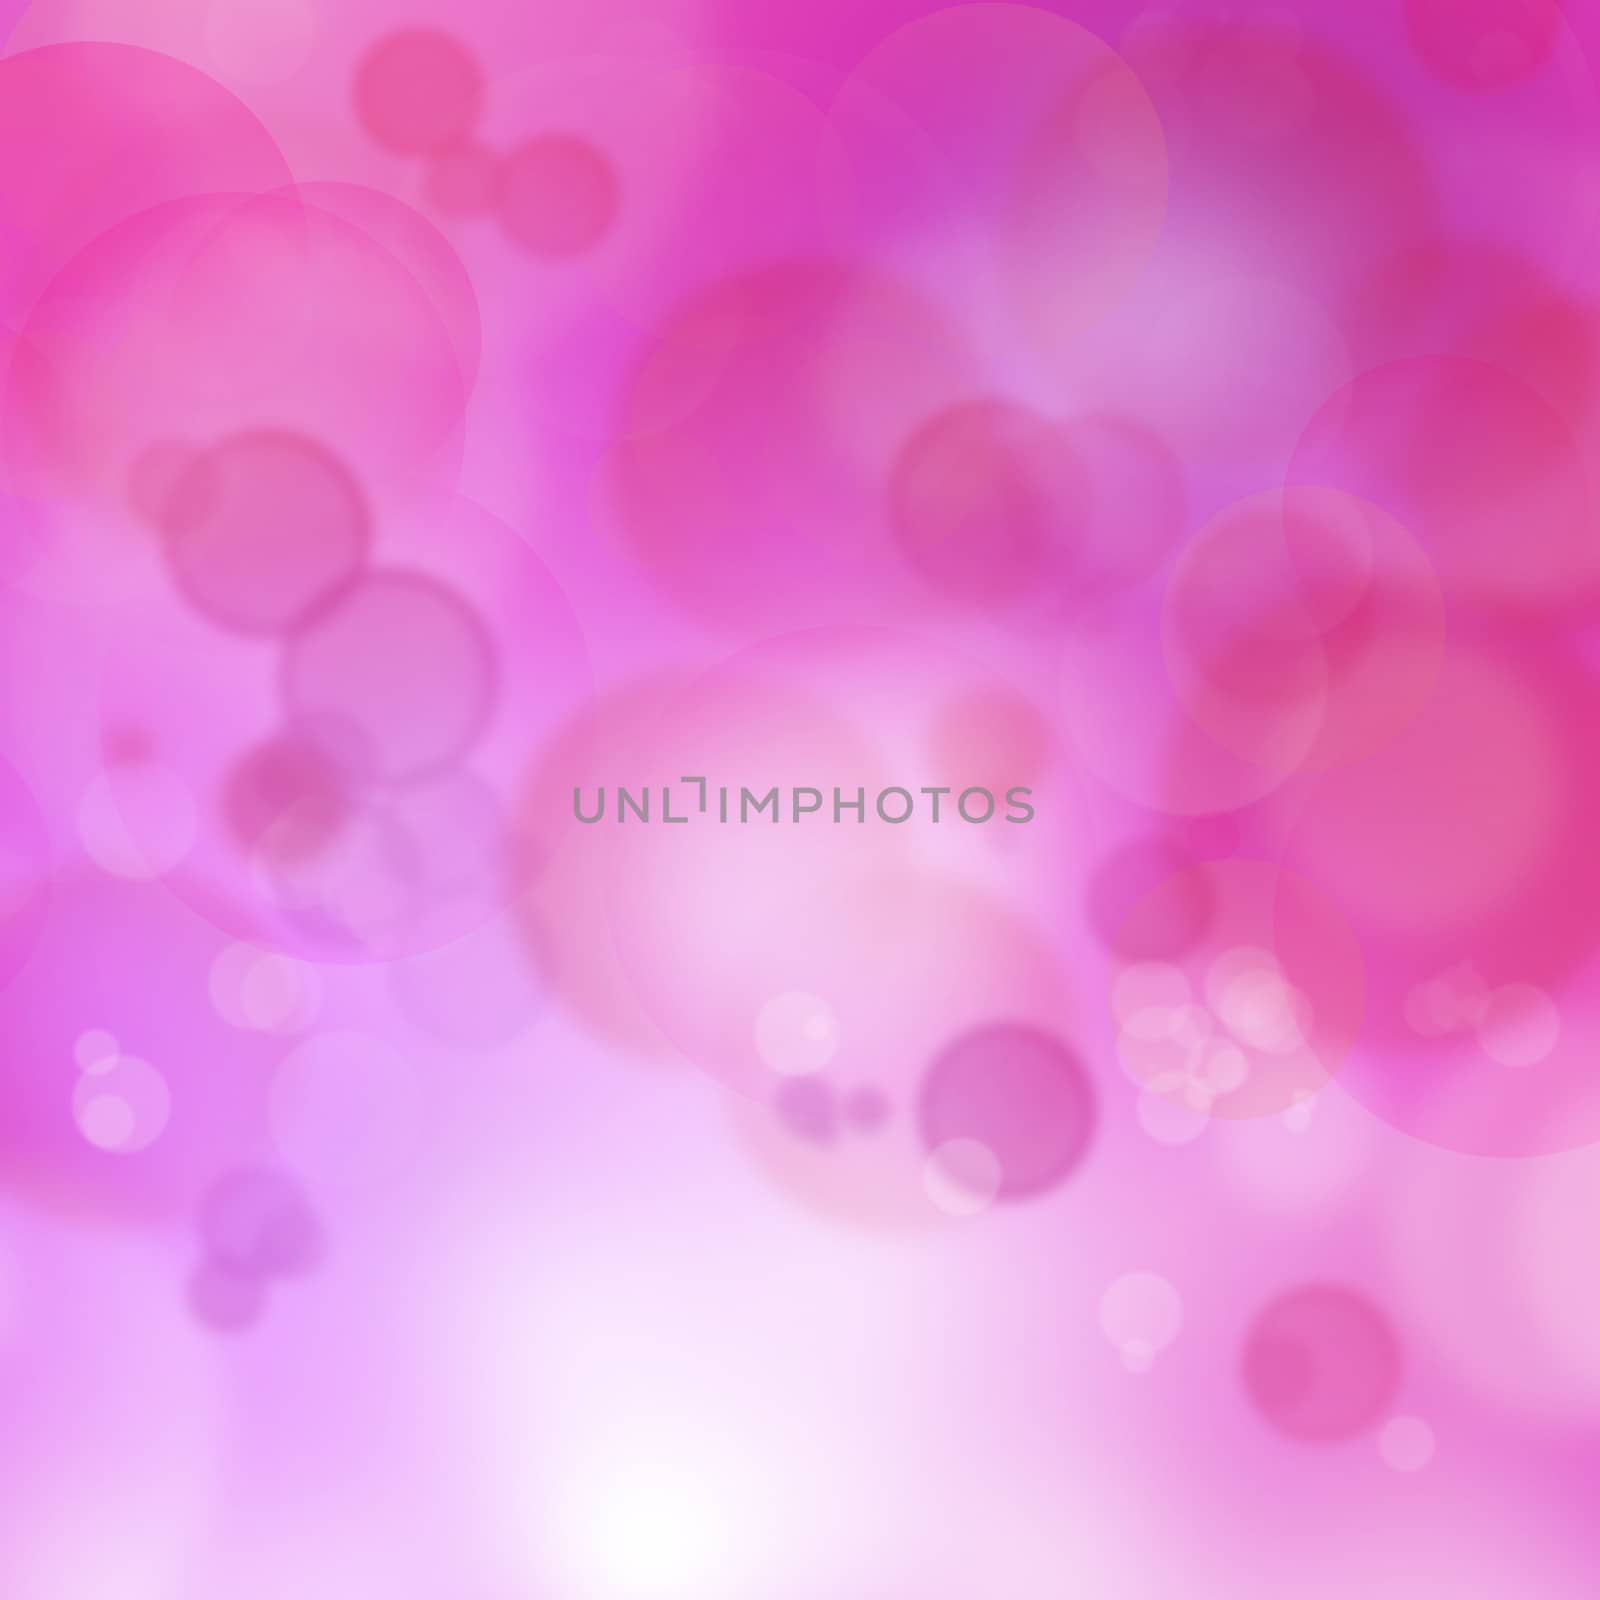 Circles on pink color background